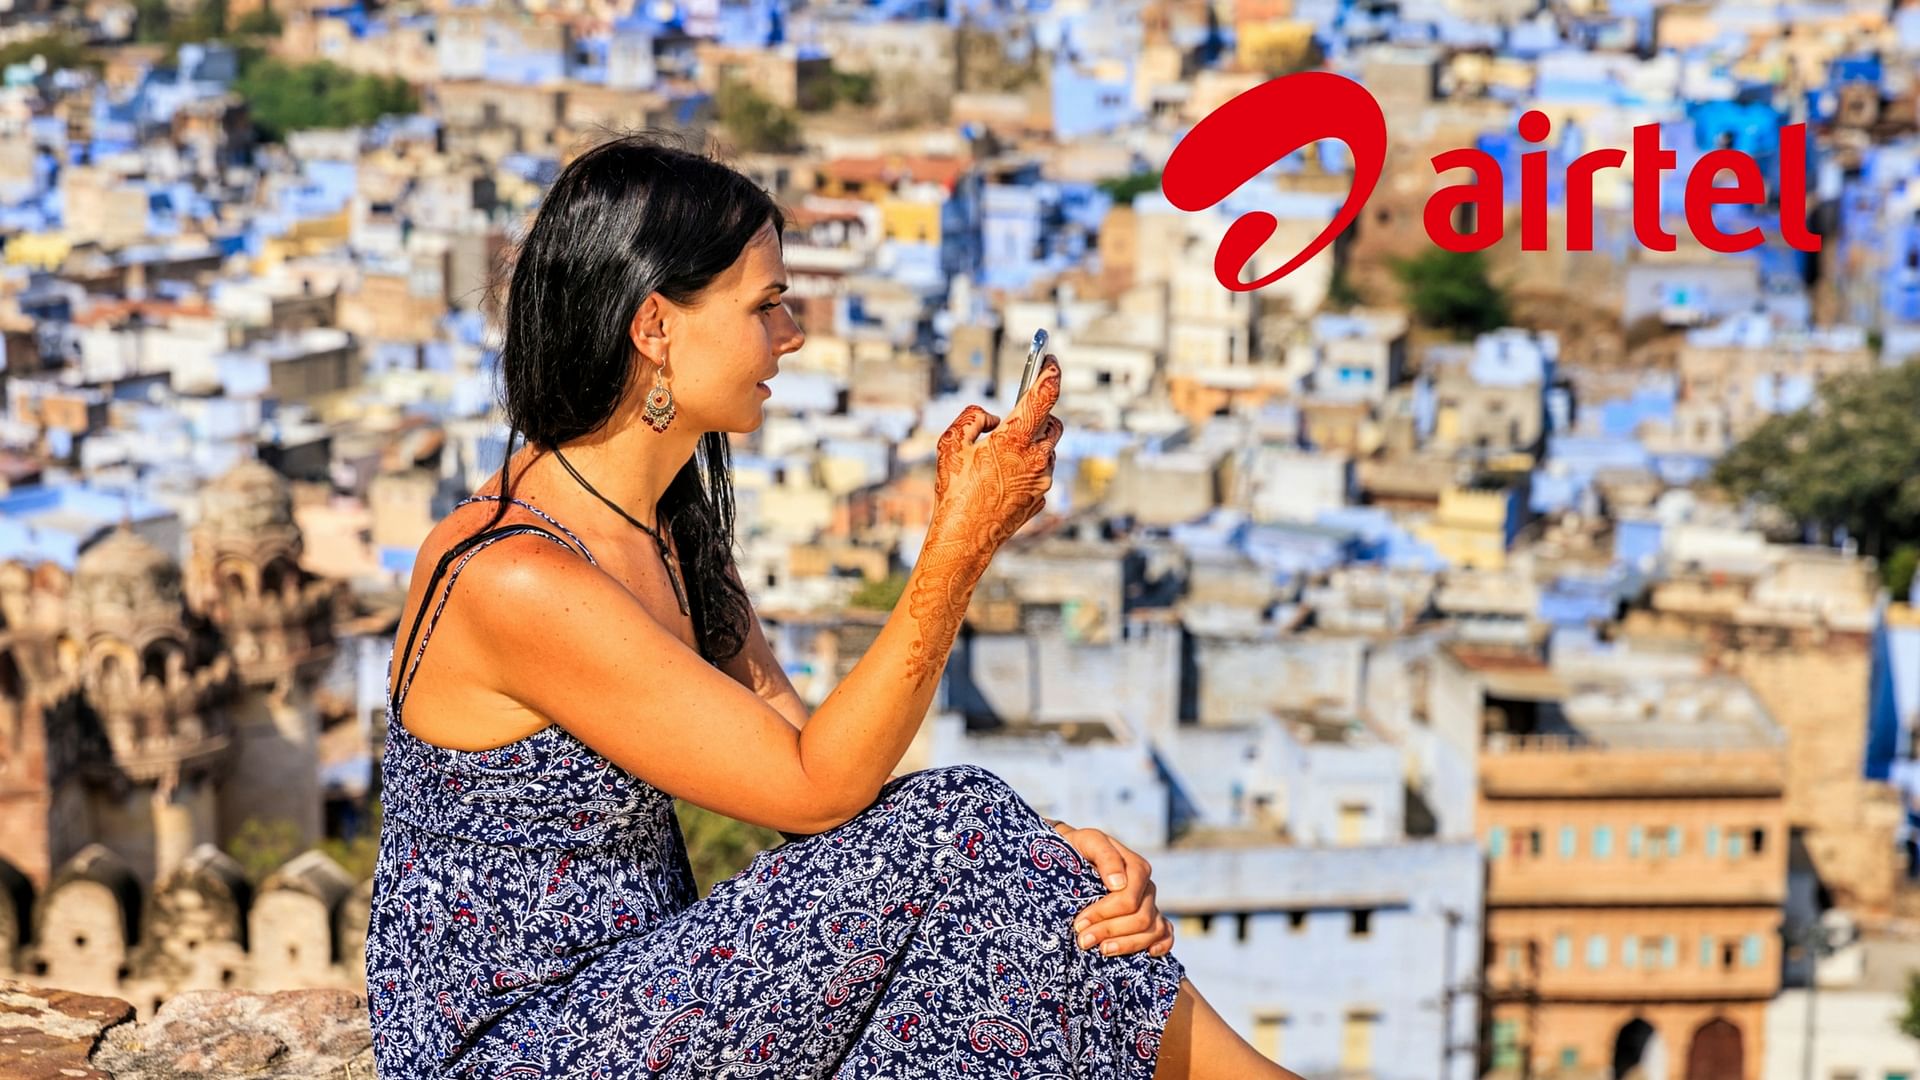 Now Airtel wants new users on its network. (Photo: iStock)